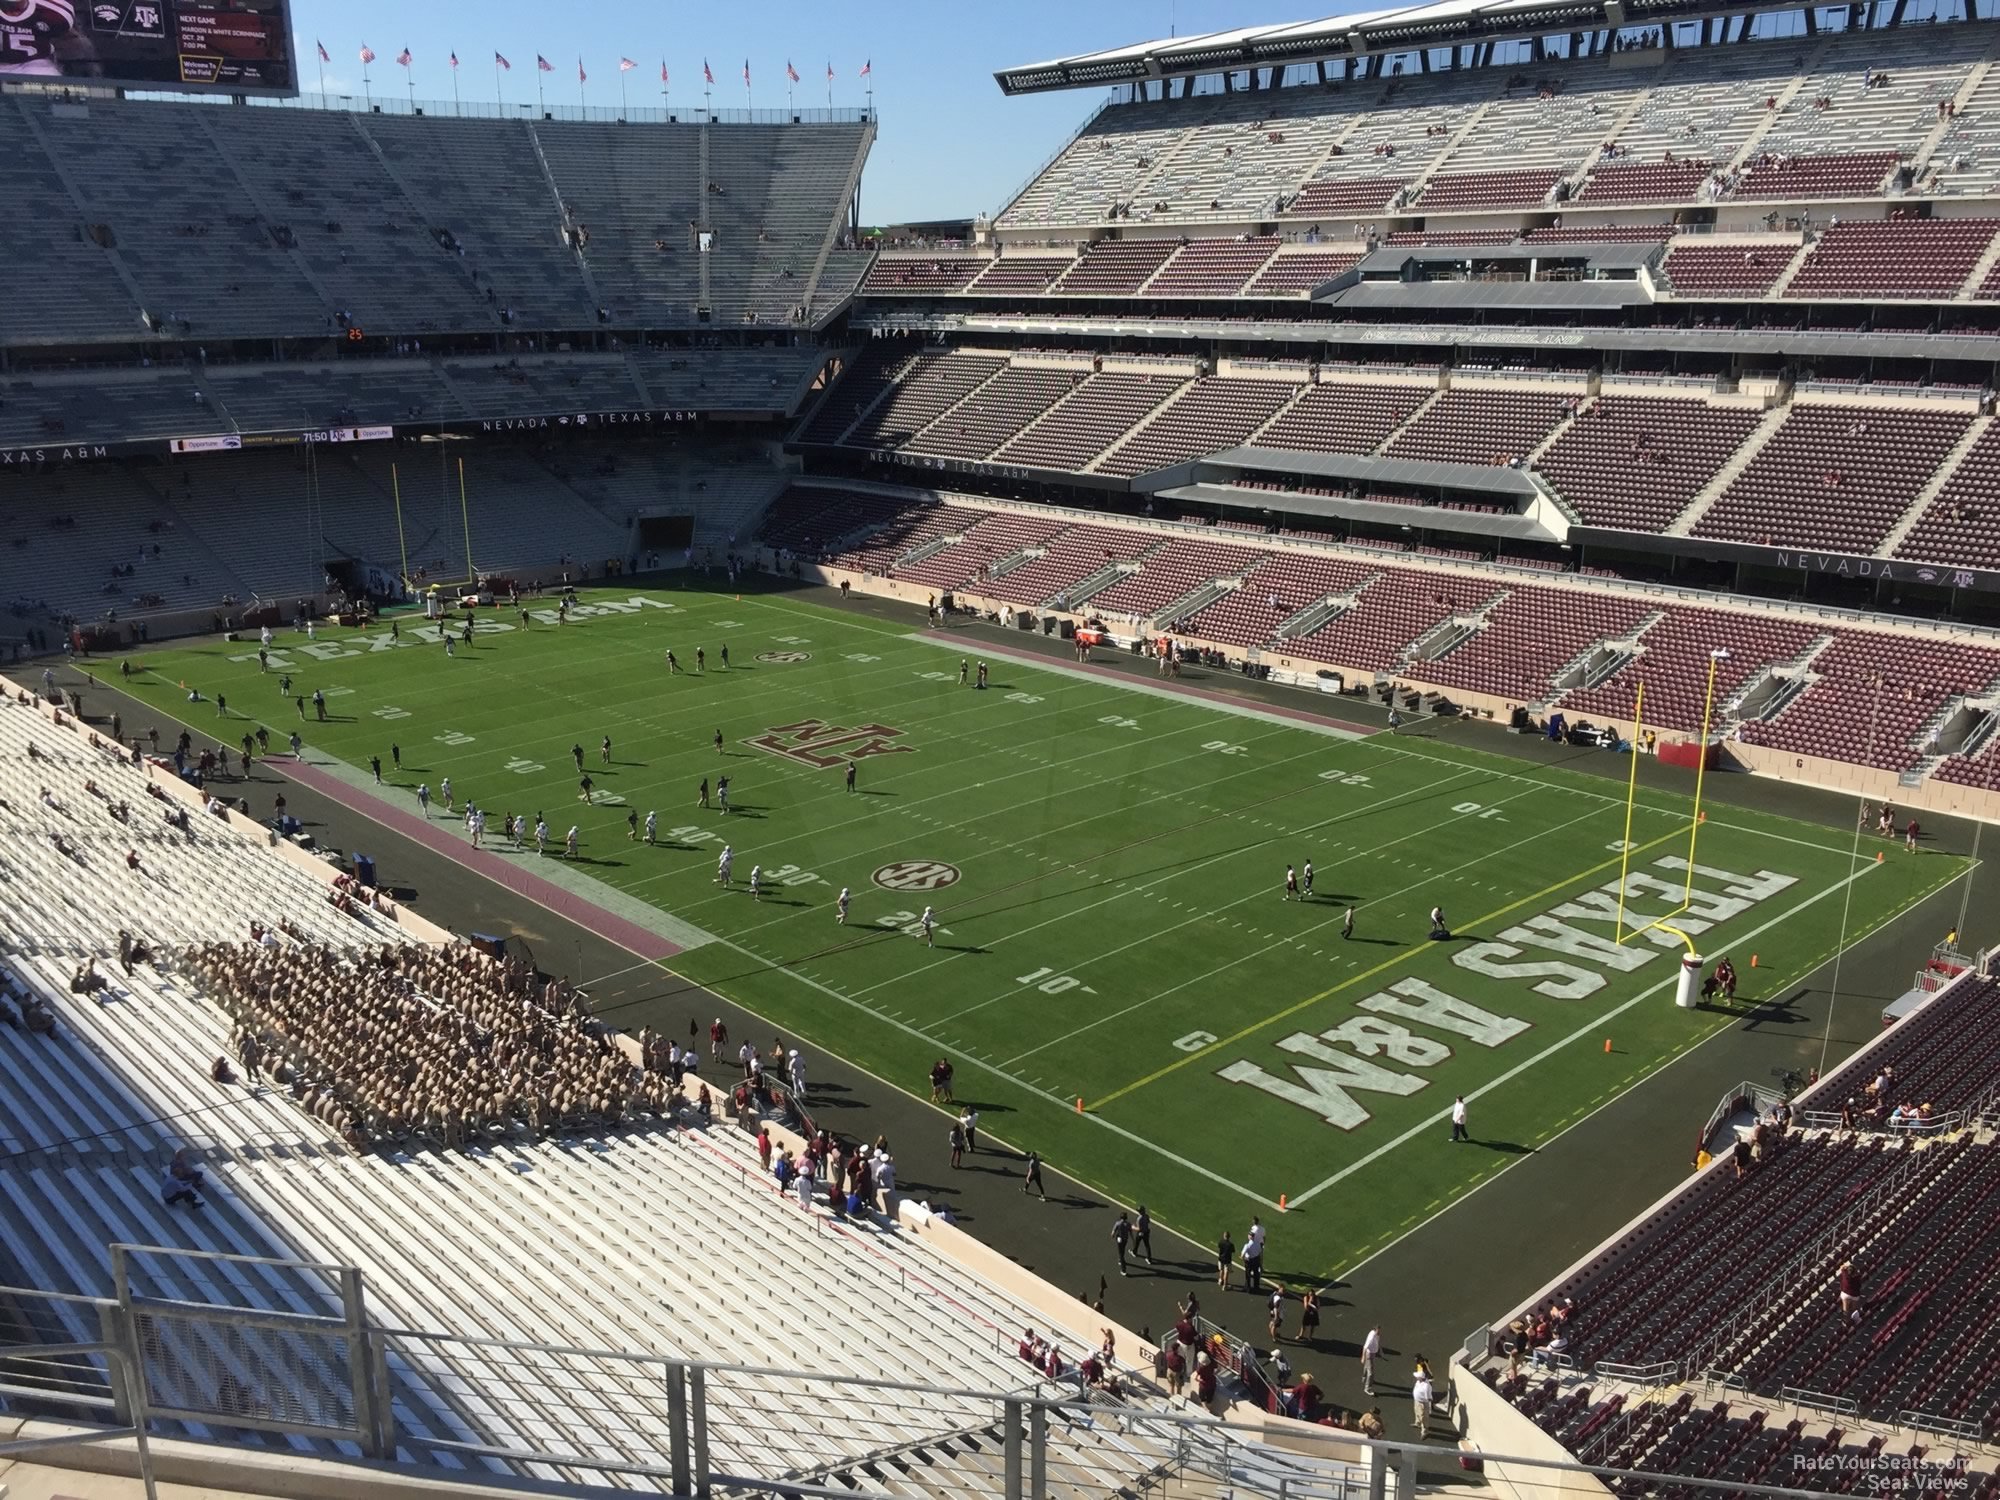 section 328, row 6 seat view  - kyle field